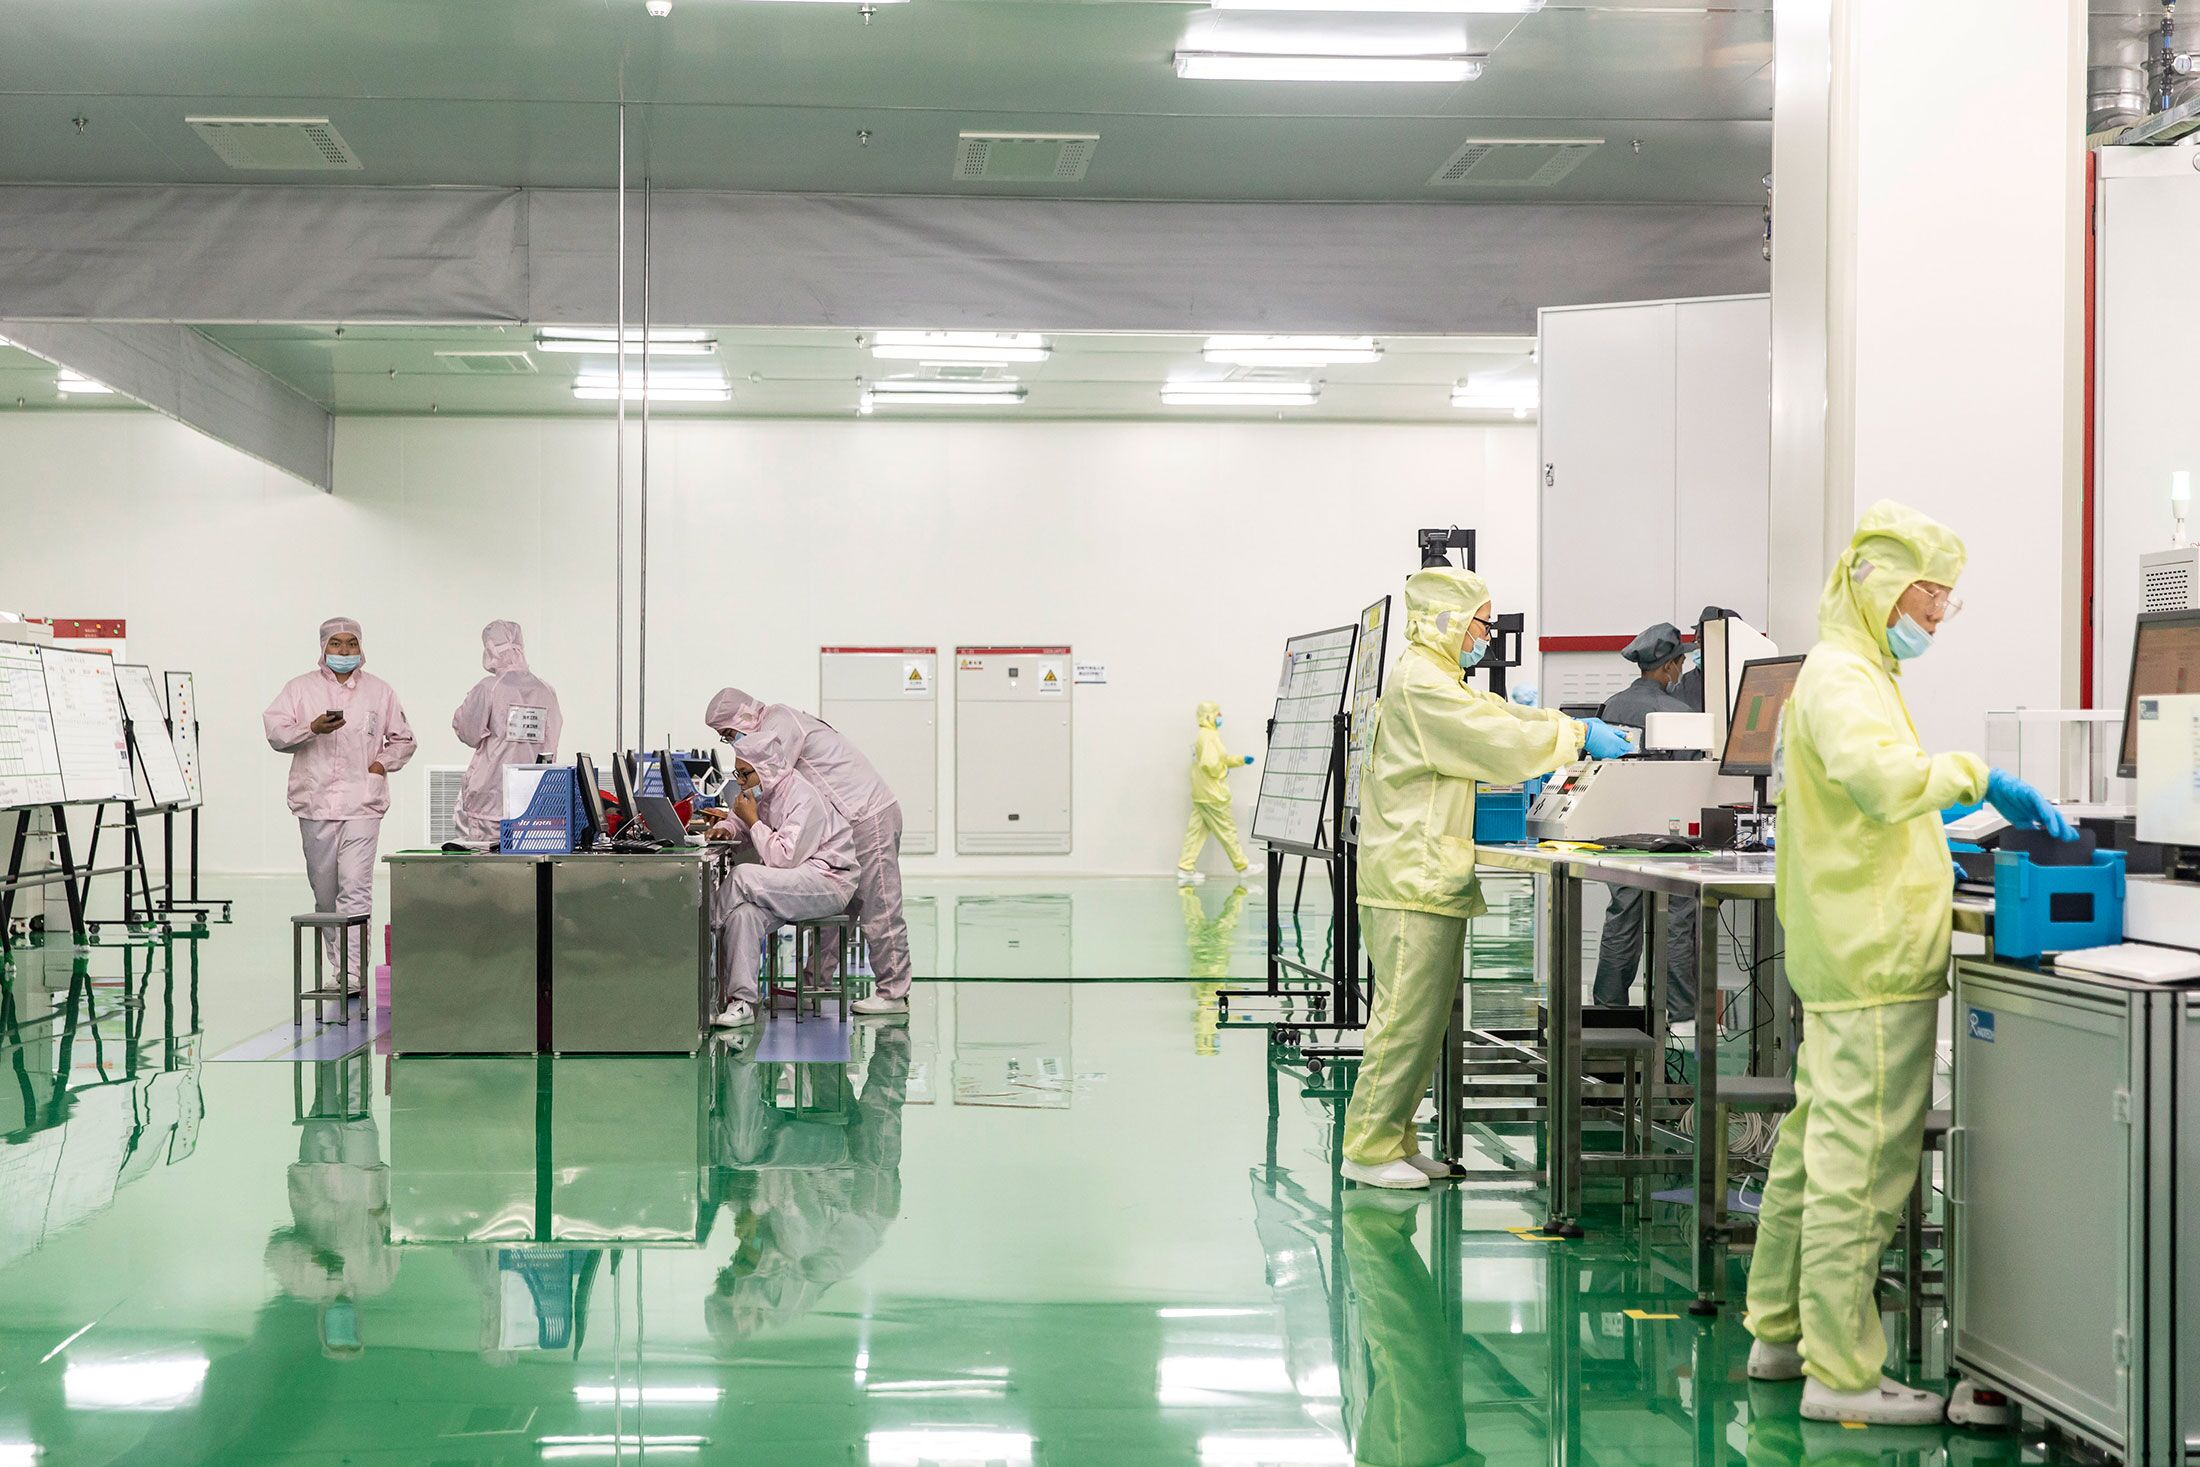 Employees operate on the newly opened photovoltaic cell production line of Longji Solar in Xi'an China, on Tuesday, 21 July 2020.